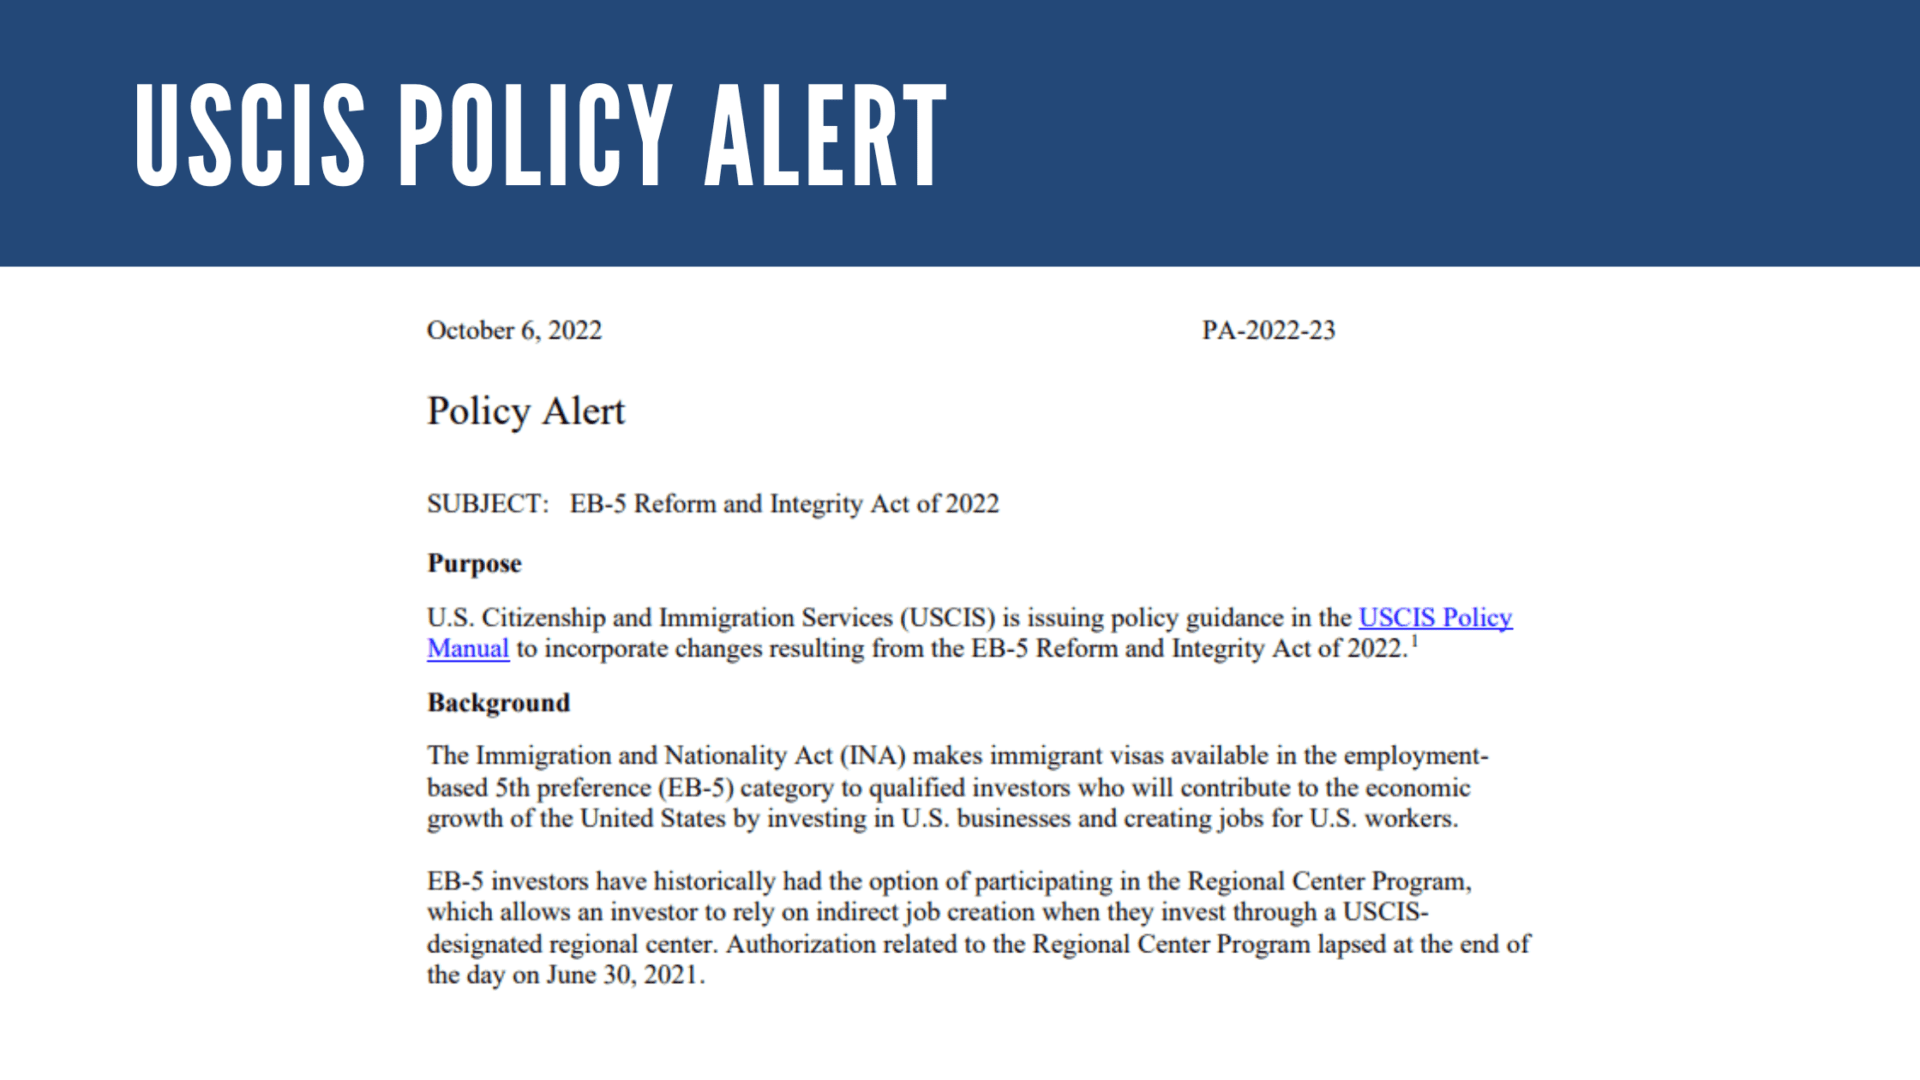 USCIS Updates EB-5 Policy Manual to Incorporate changes from the EB-5 Reform and Integrity Act of 2022